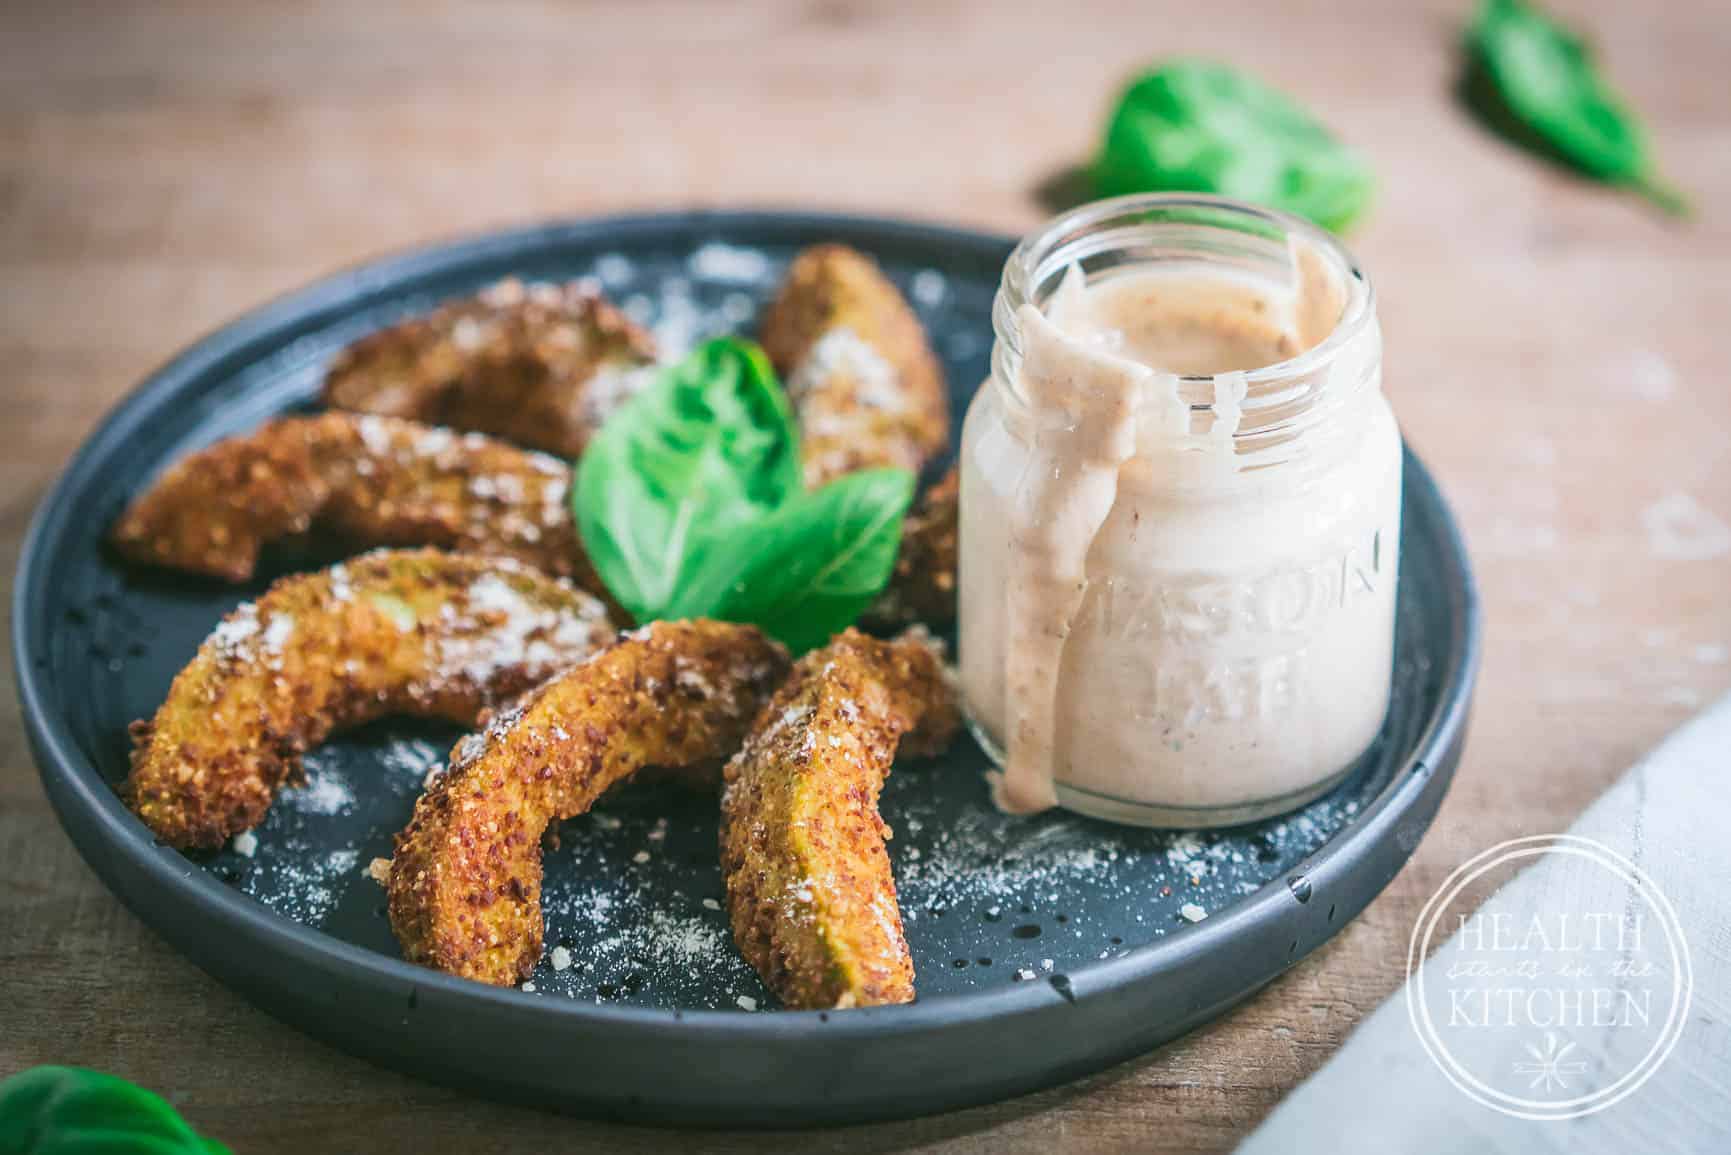 Keto Avocado Fries with Chipotle Ranch